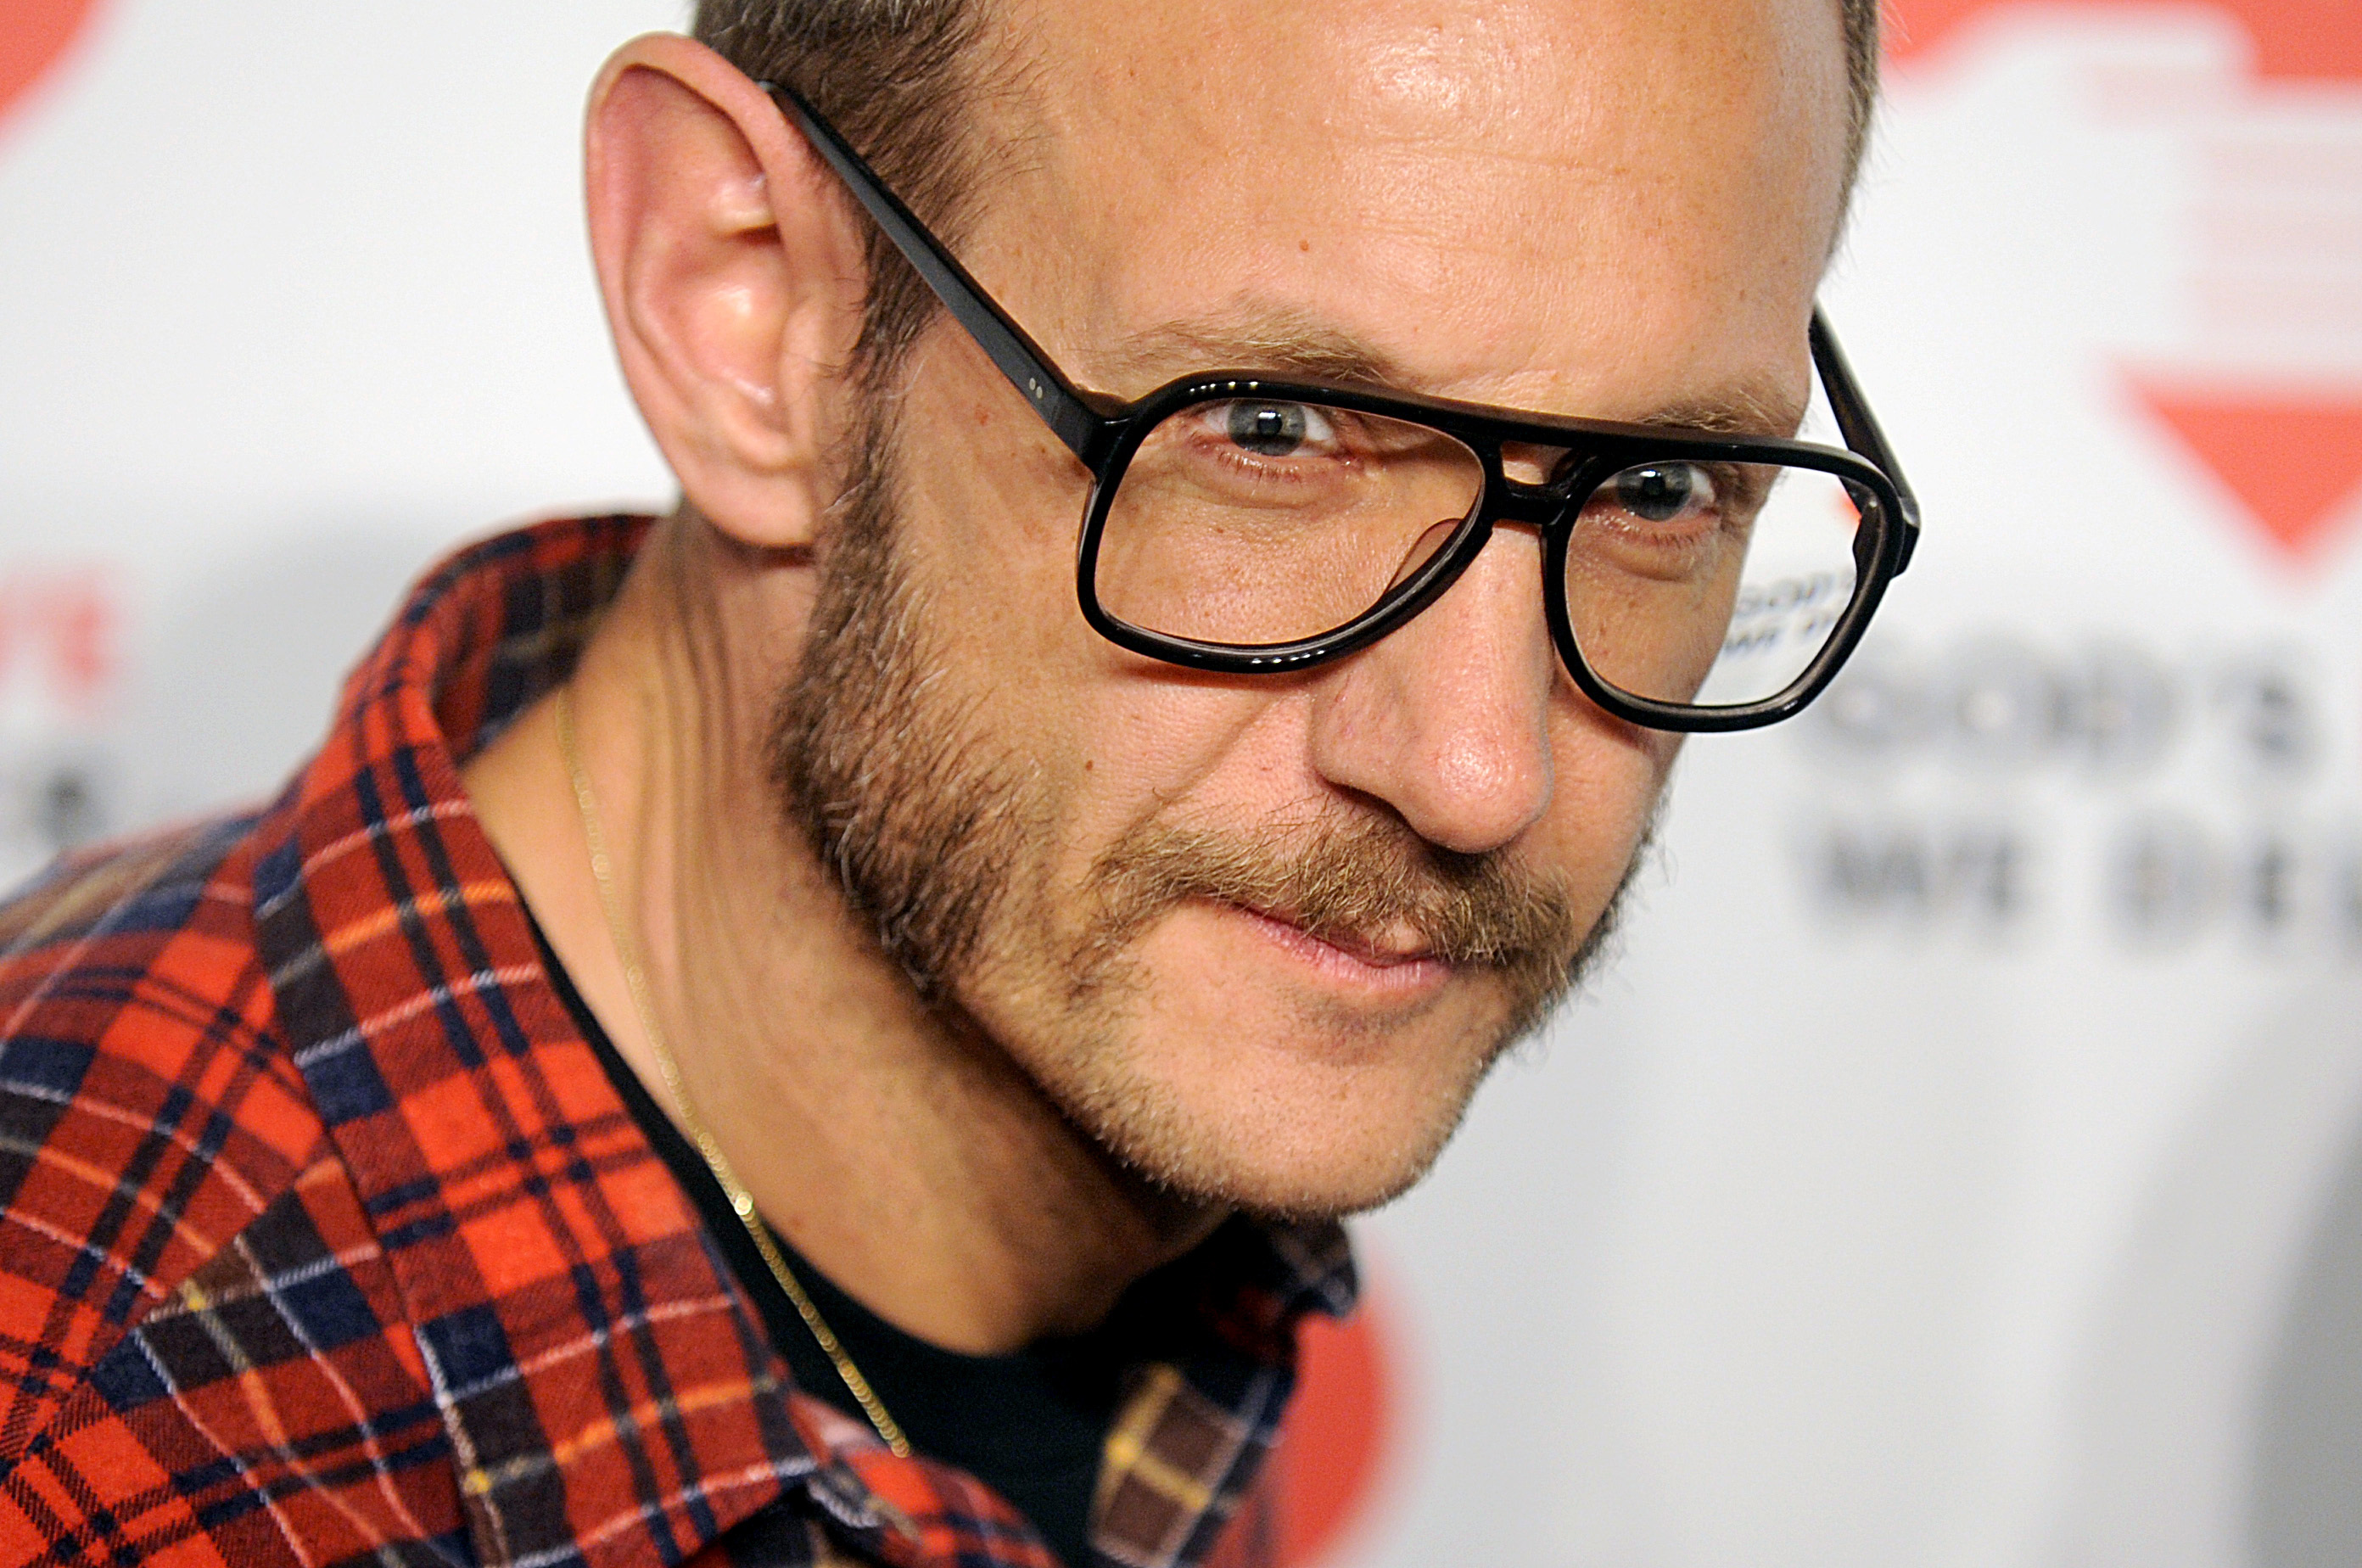 Terry Richardson attends the 2013 GodÍs Love We Deliver 2013 Golden Heart Awards at Spring Studios in New York, NY on October 16, 2013.